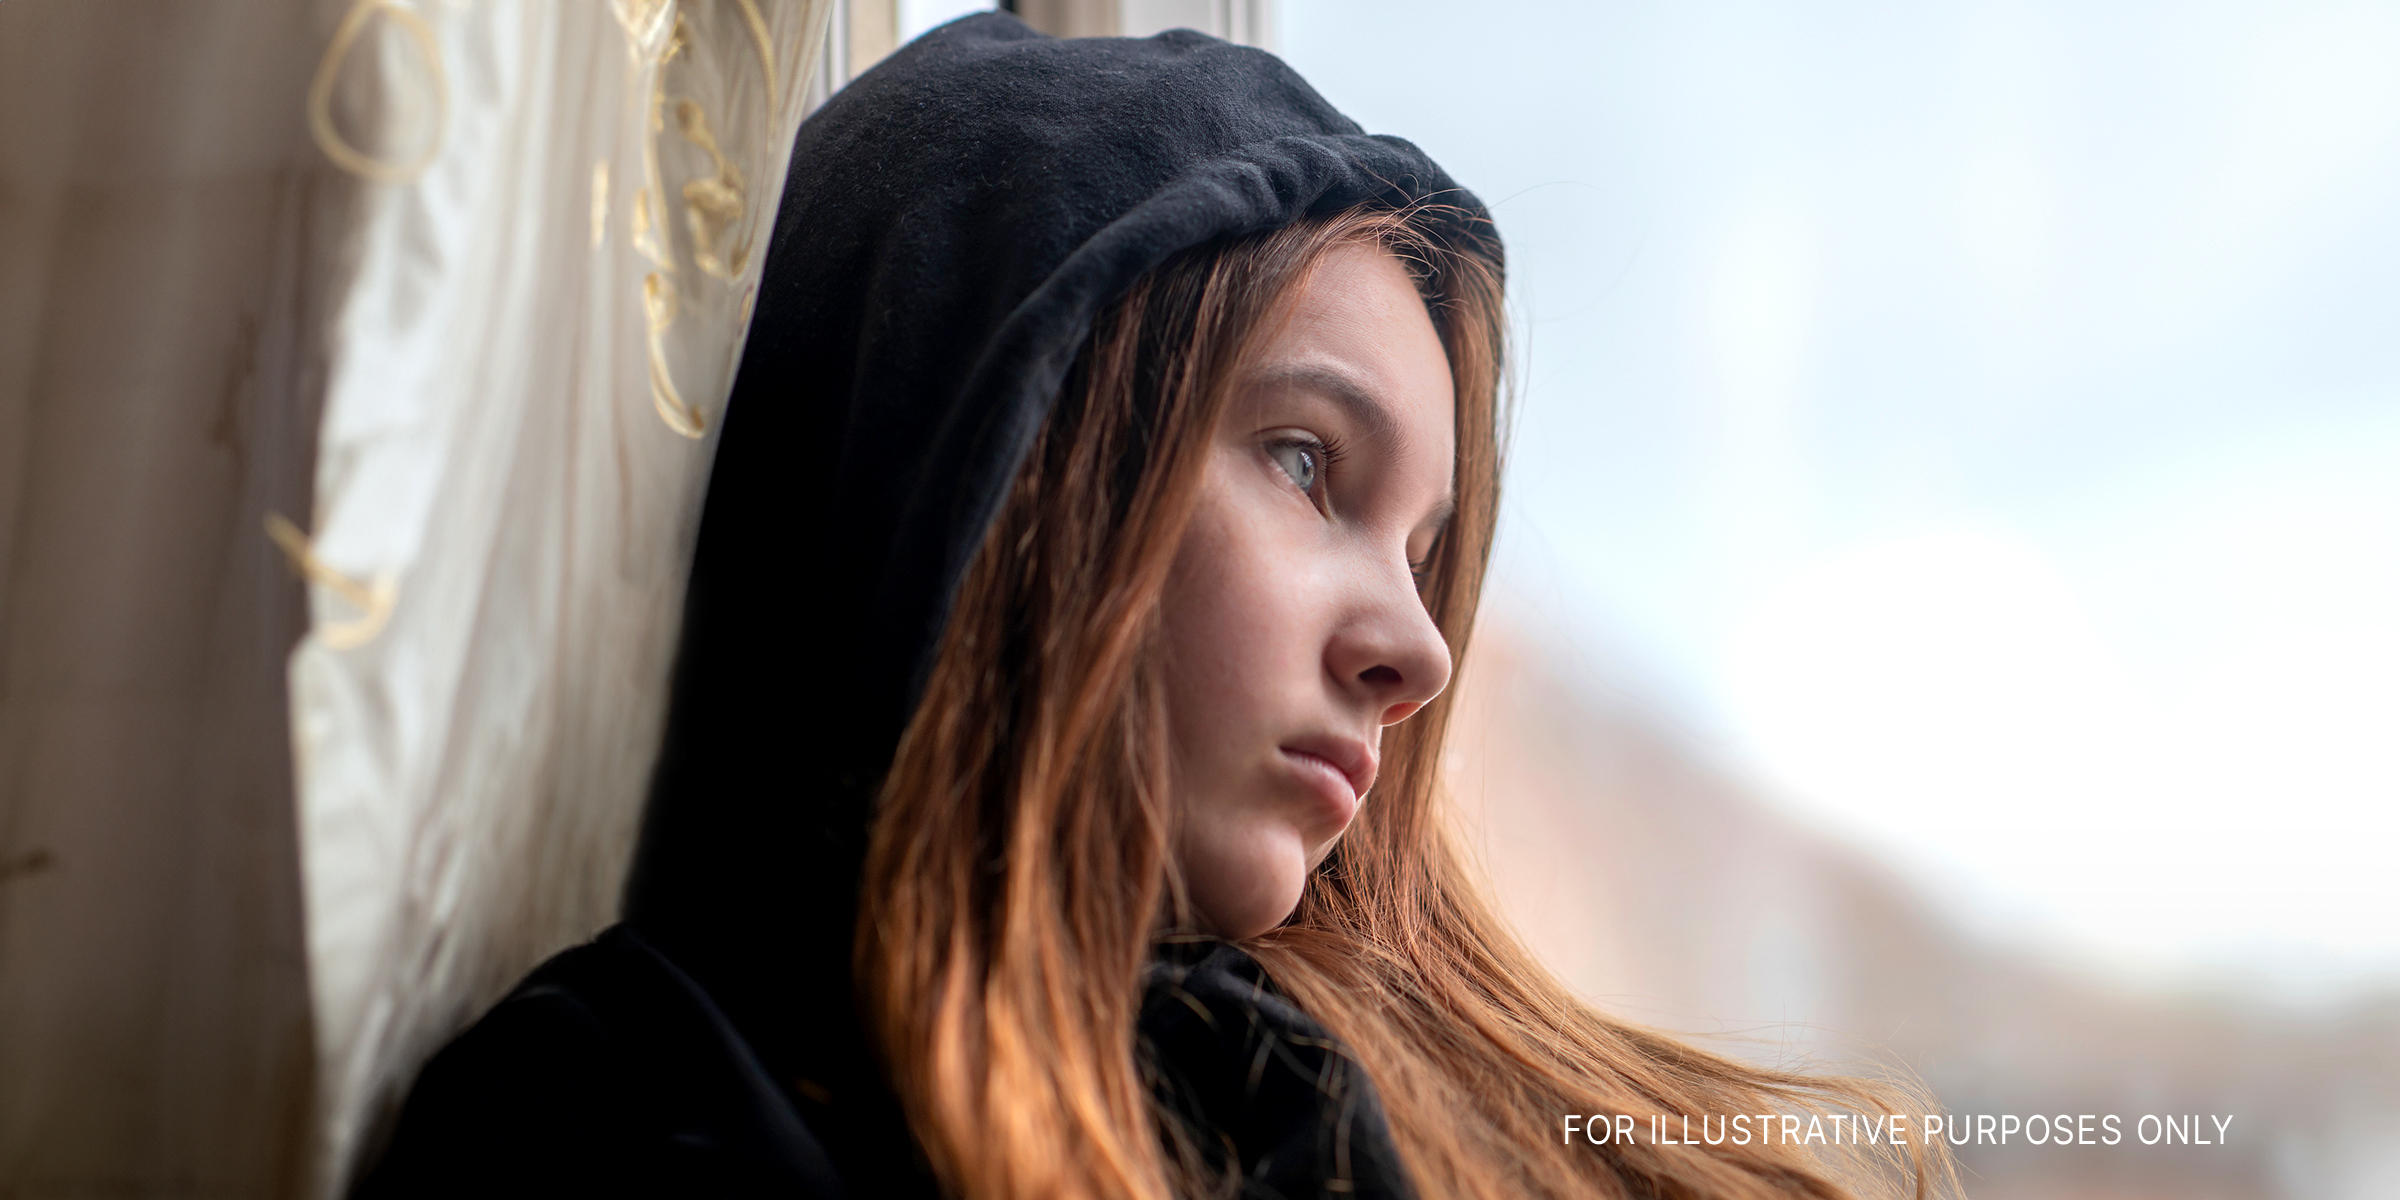 A sad teen girl looks out of the window | Source: Shutterstock